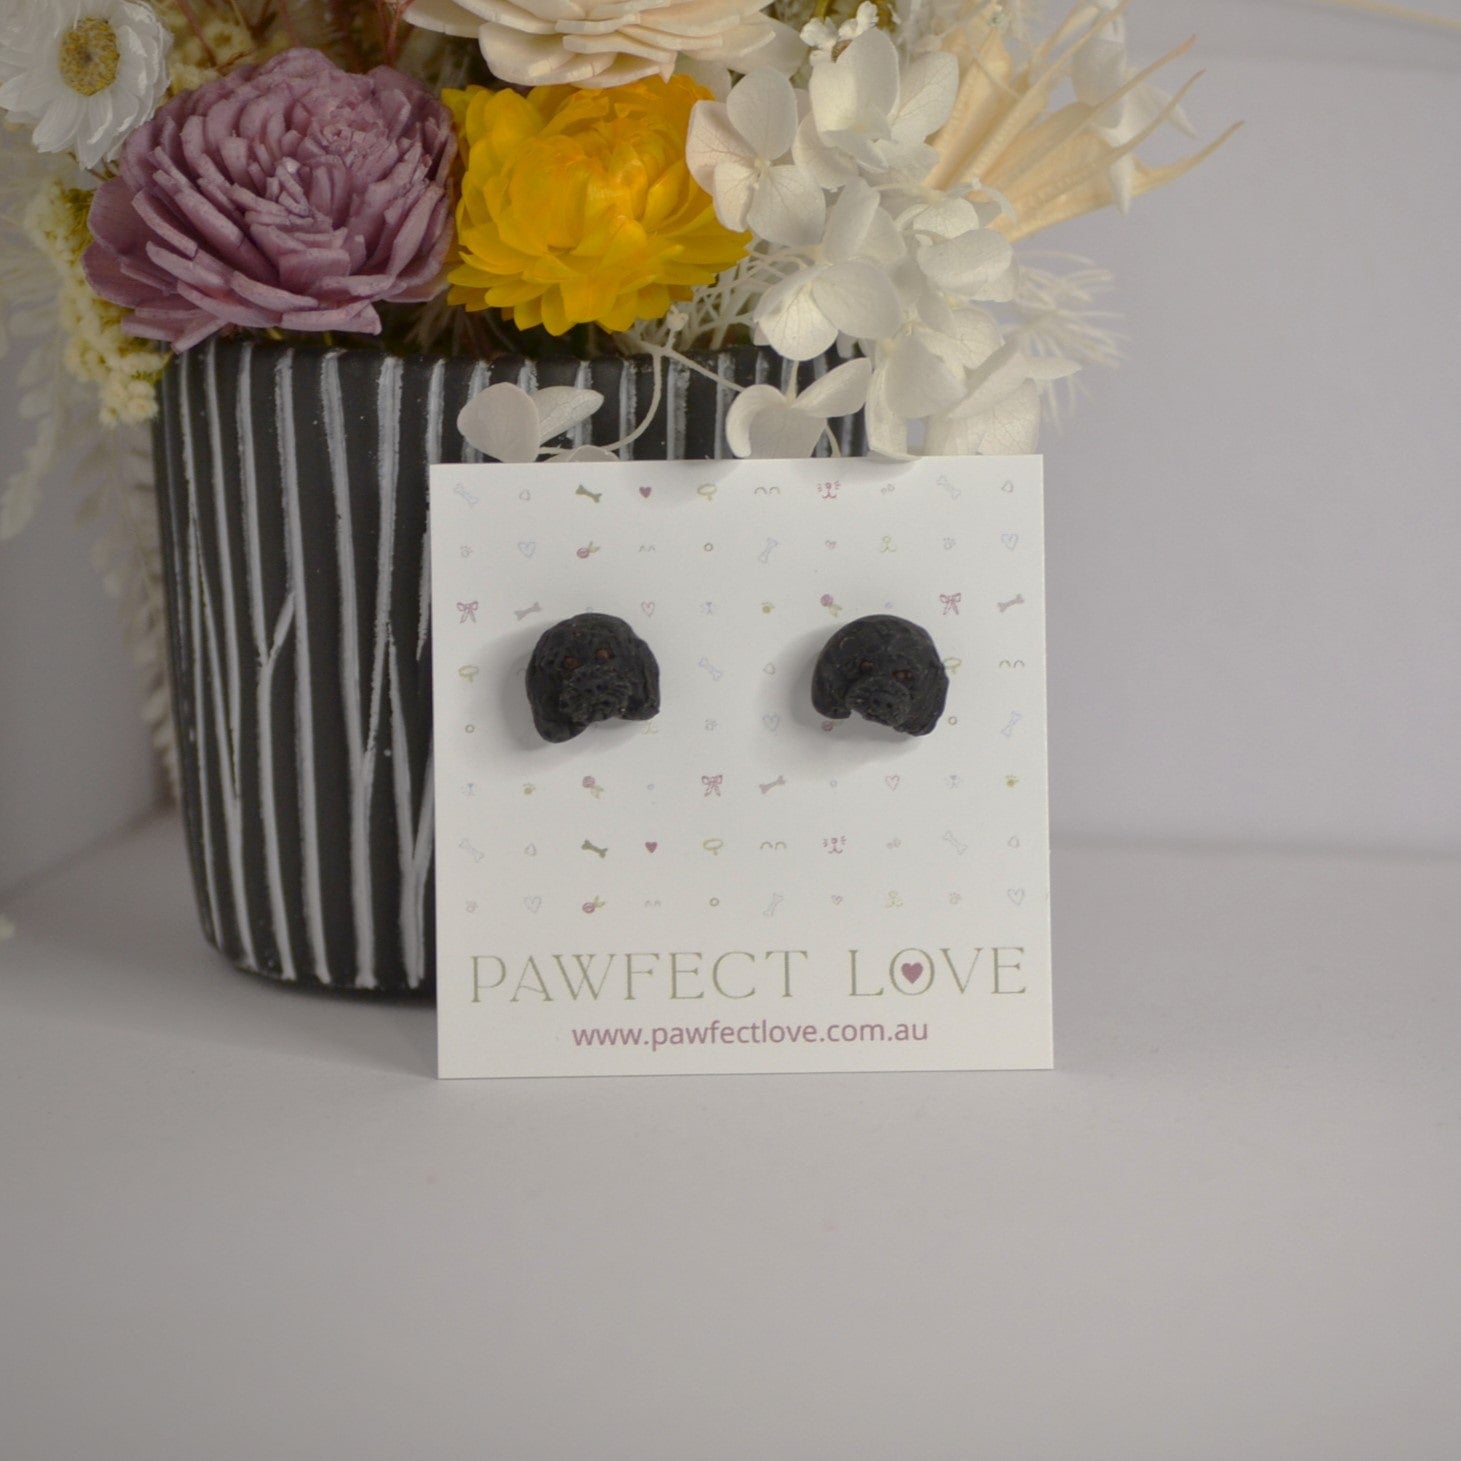 Handmade black poodle stud earrings by Pawfect Love, positioned in front of dried flower arrangement